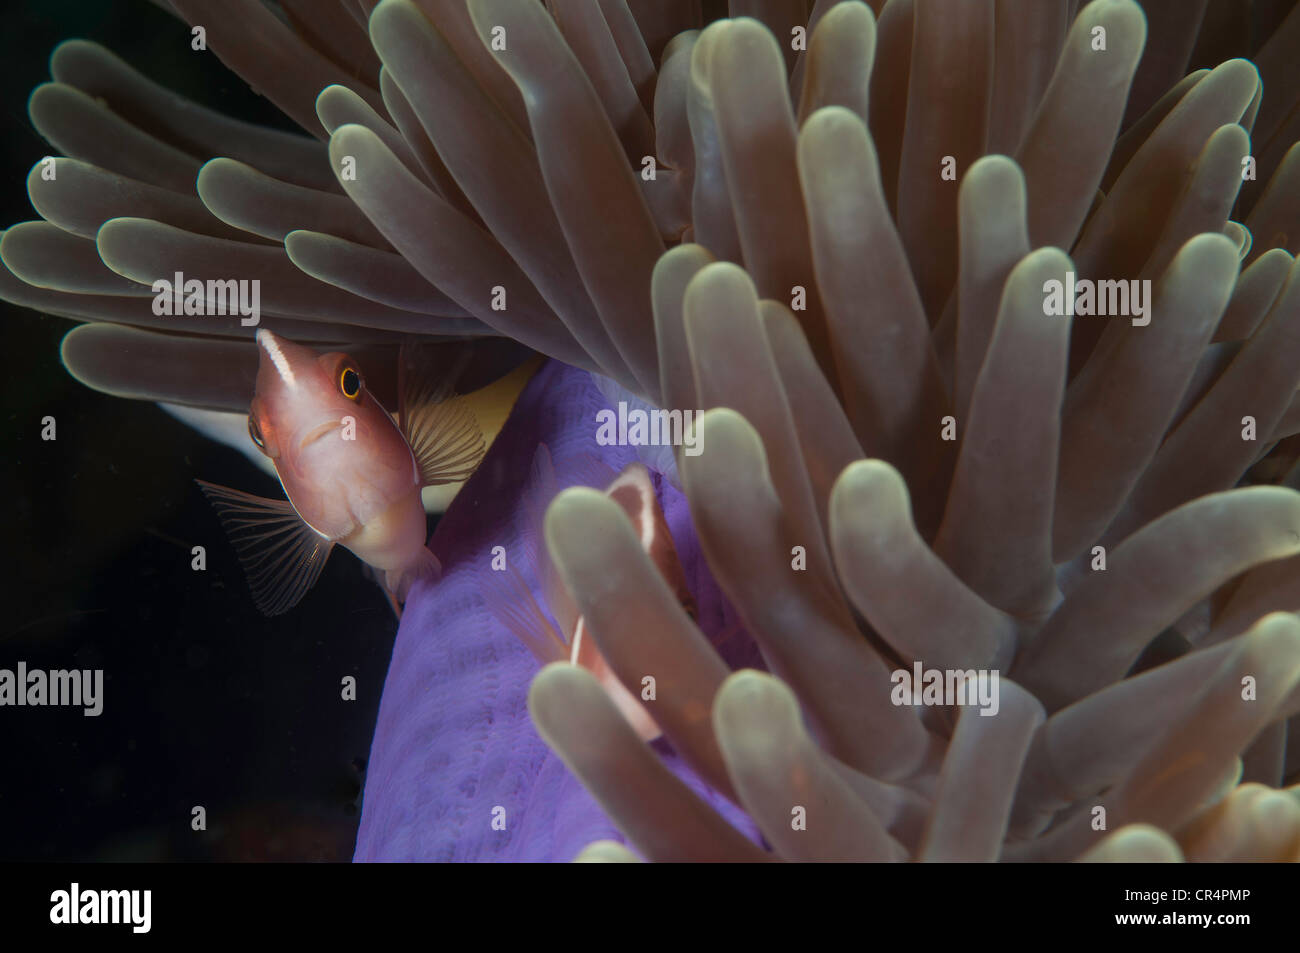 Pink anemonefish (Amphiprion perideraion) on a purple anemone ball in the Lembeh Straits Stock Photo